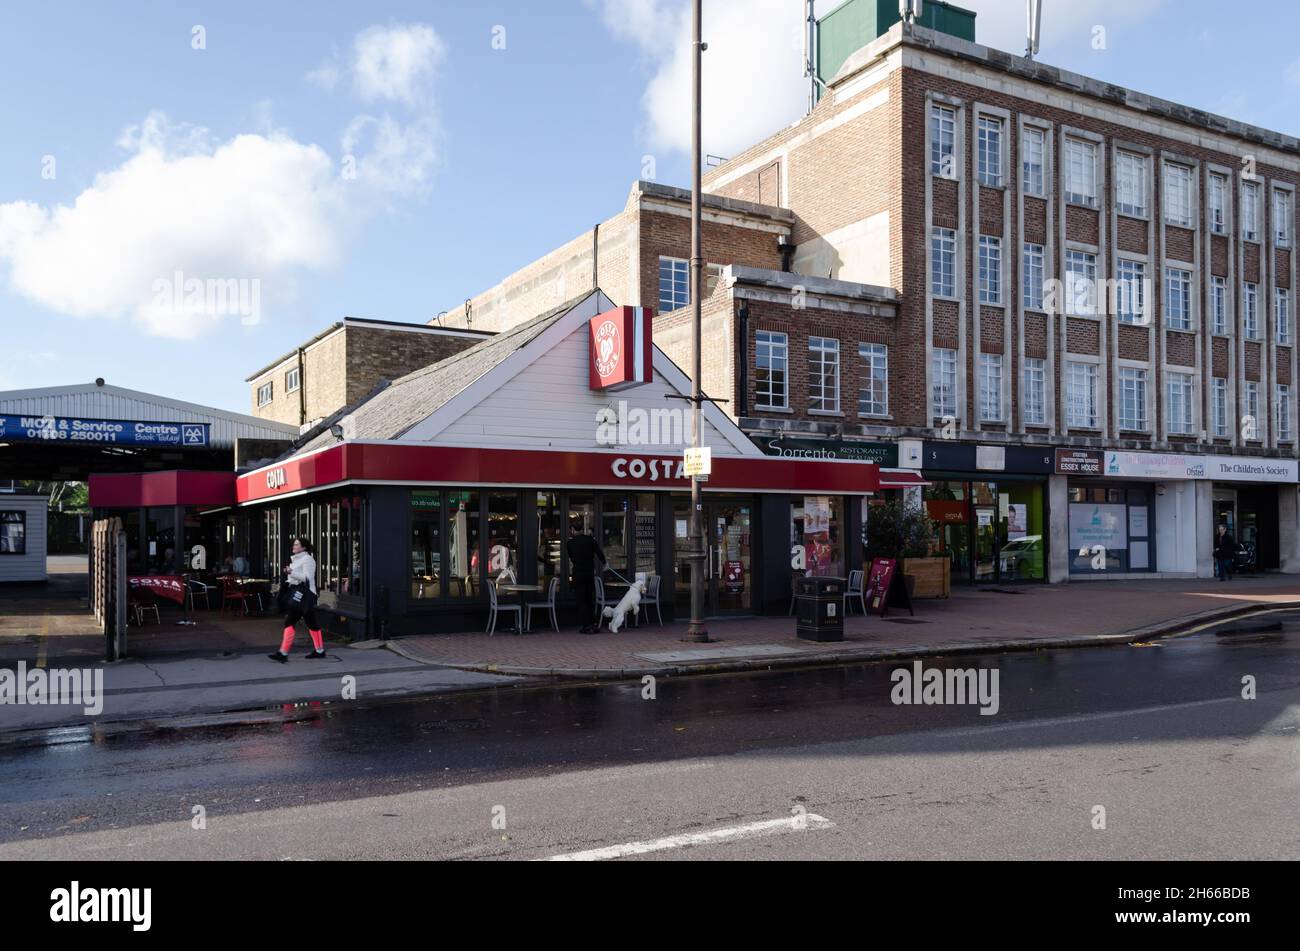 The Costa Coffee Restaurant Along Station Road In Upminster, East London, UK Stock Photo